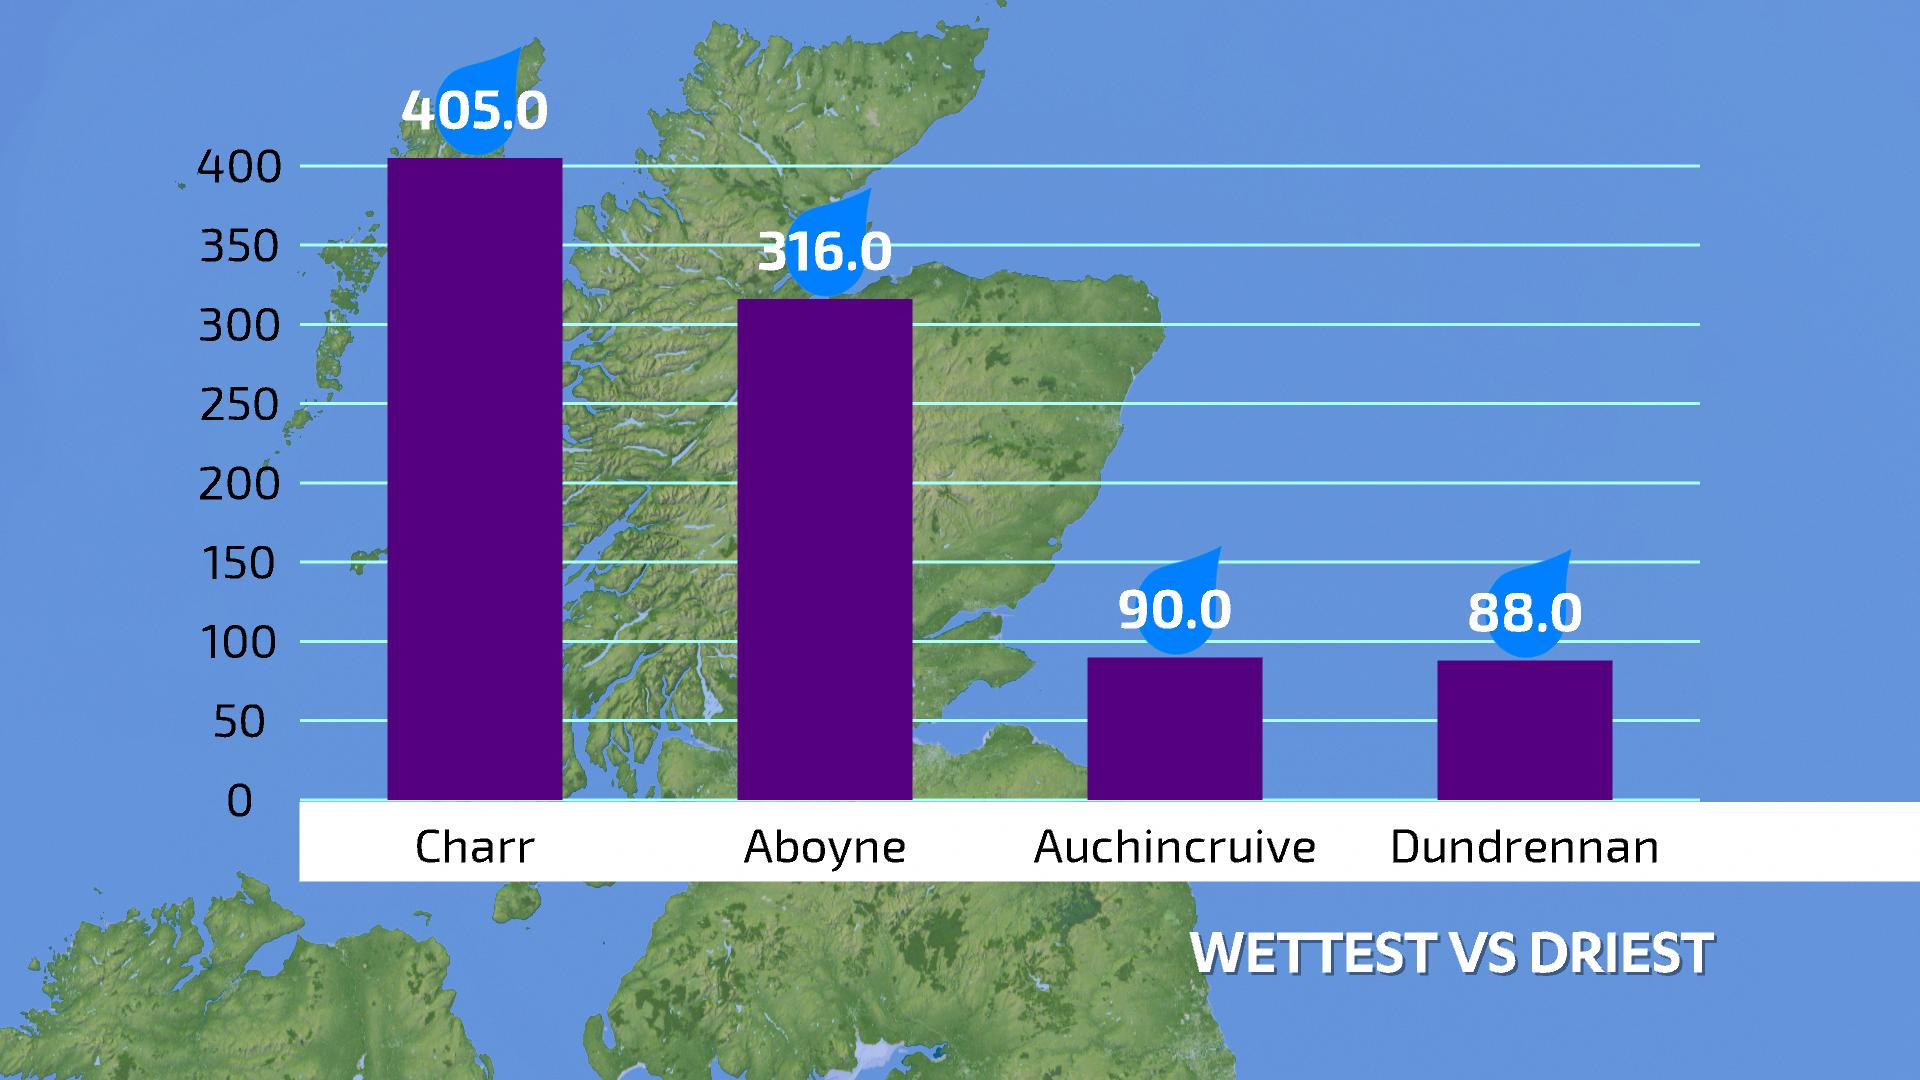 Wettest vs driest as eastern Scotland has wettest October on record.